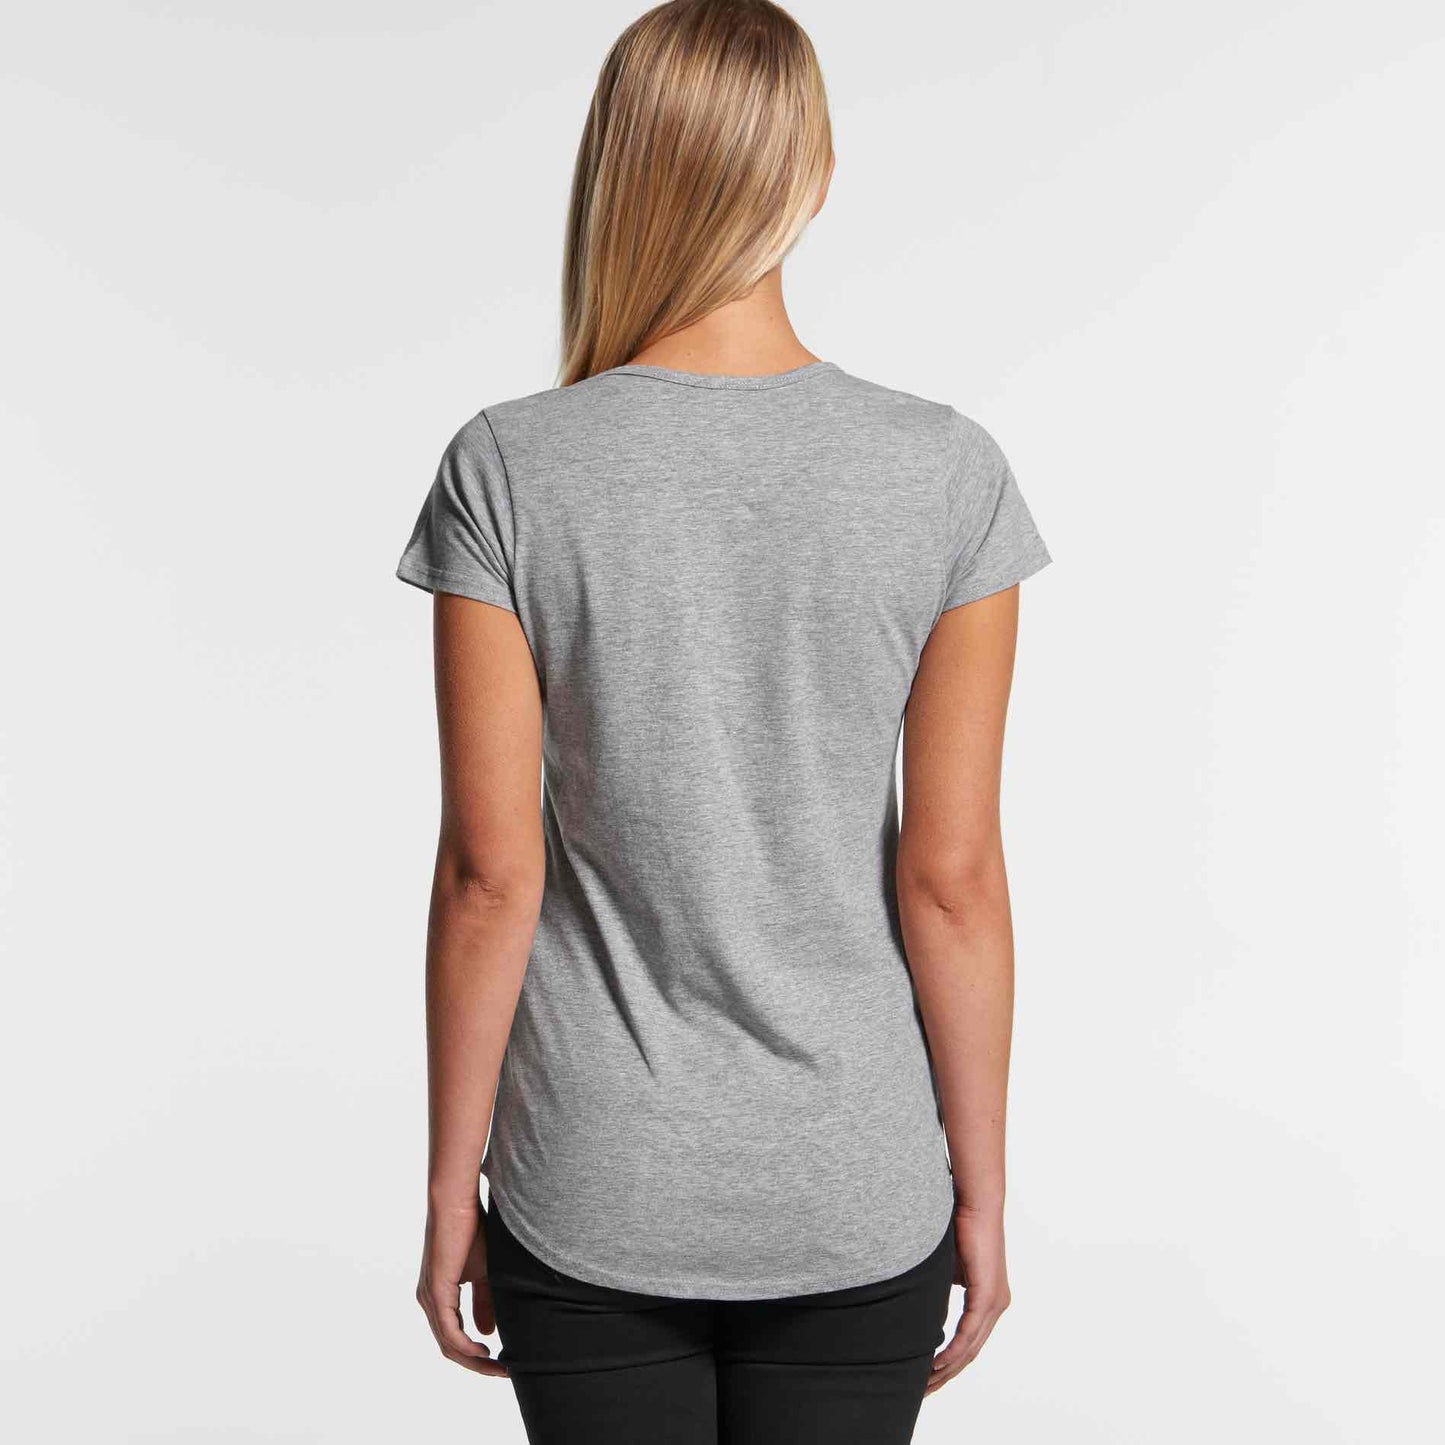 Find Your Rainbow - Womens Scoop Neck T-Shirt Womens Scoop Neck T-shirt Womens